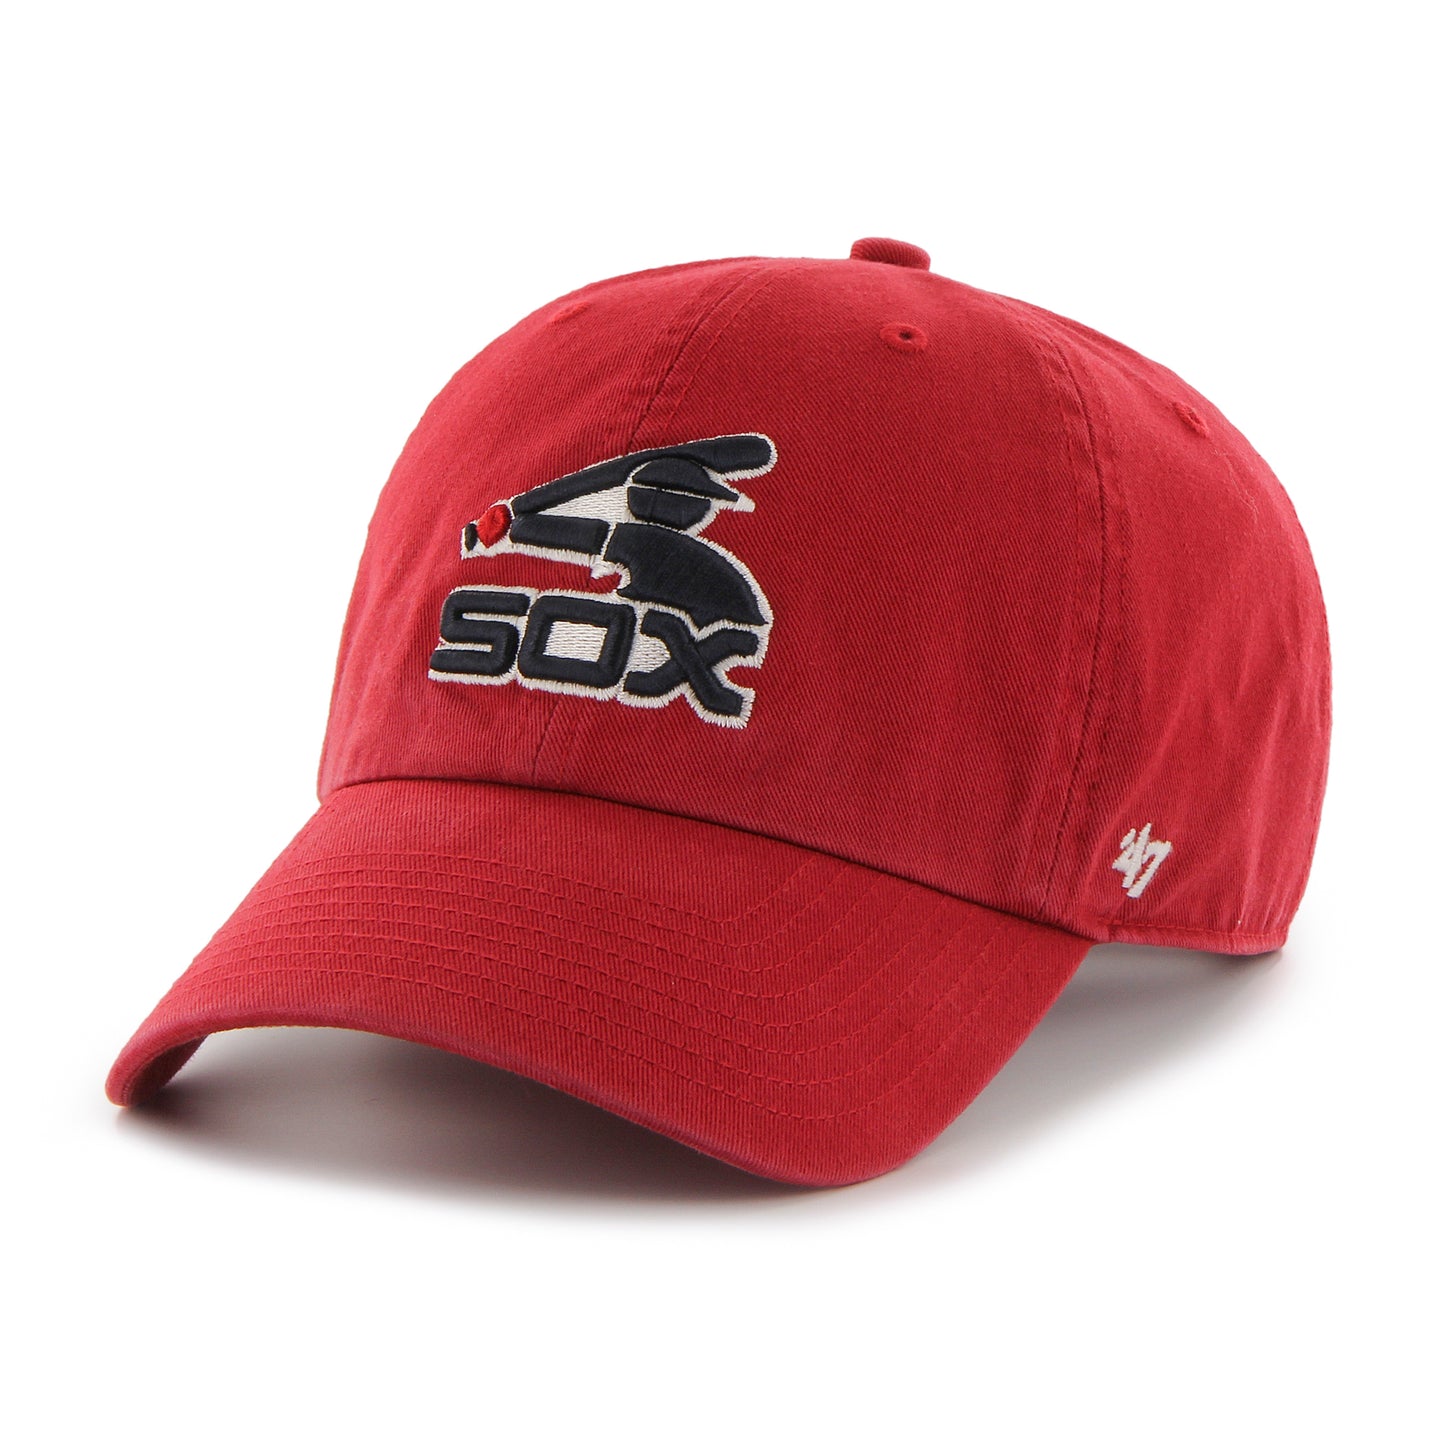 Chicago White Sox Red Batterman 47 Clean Up